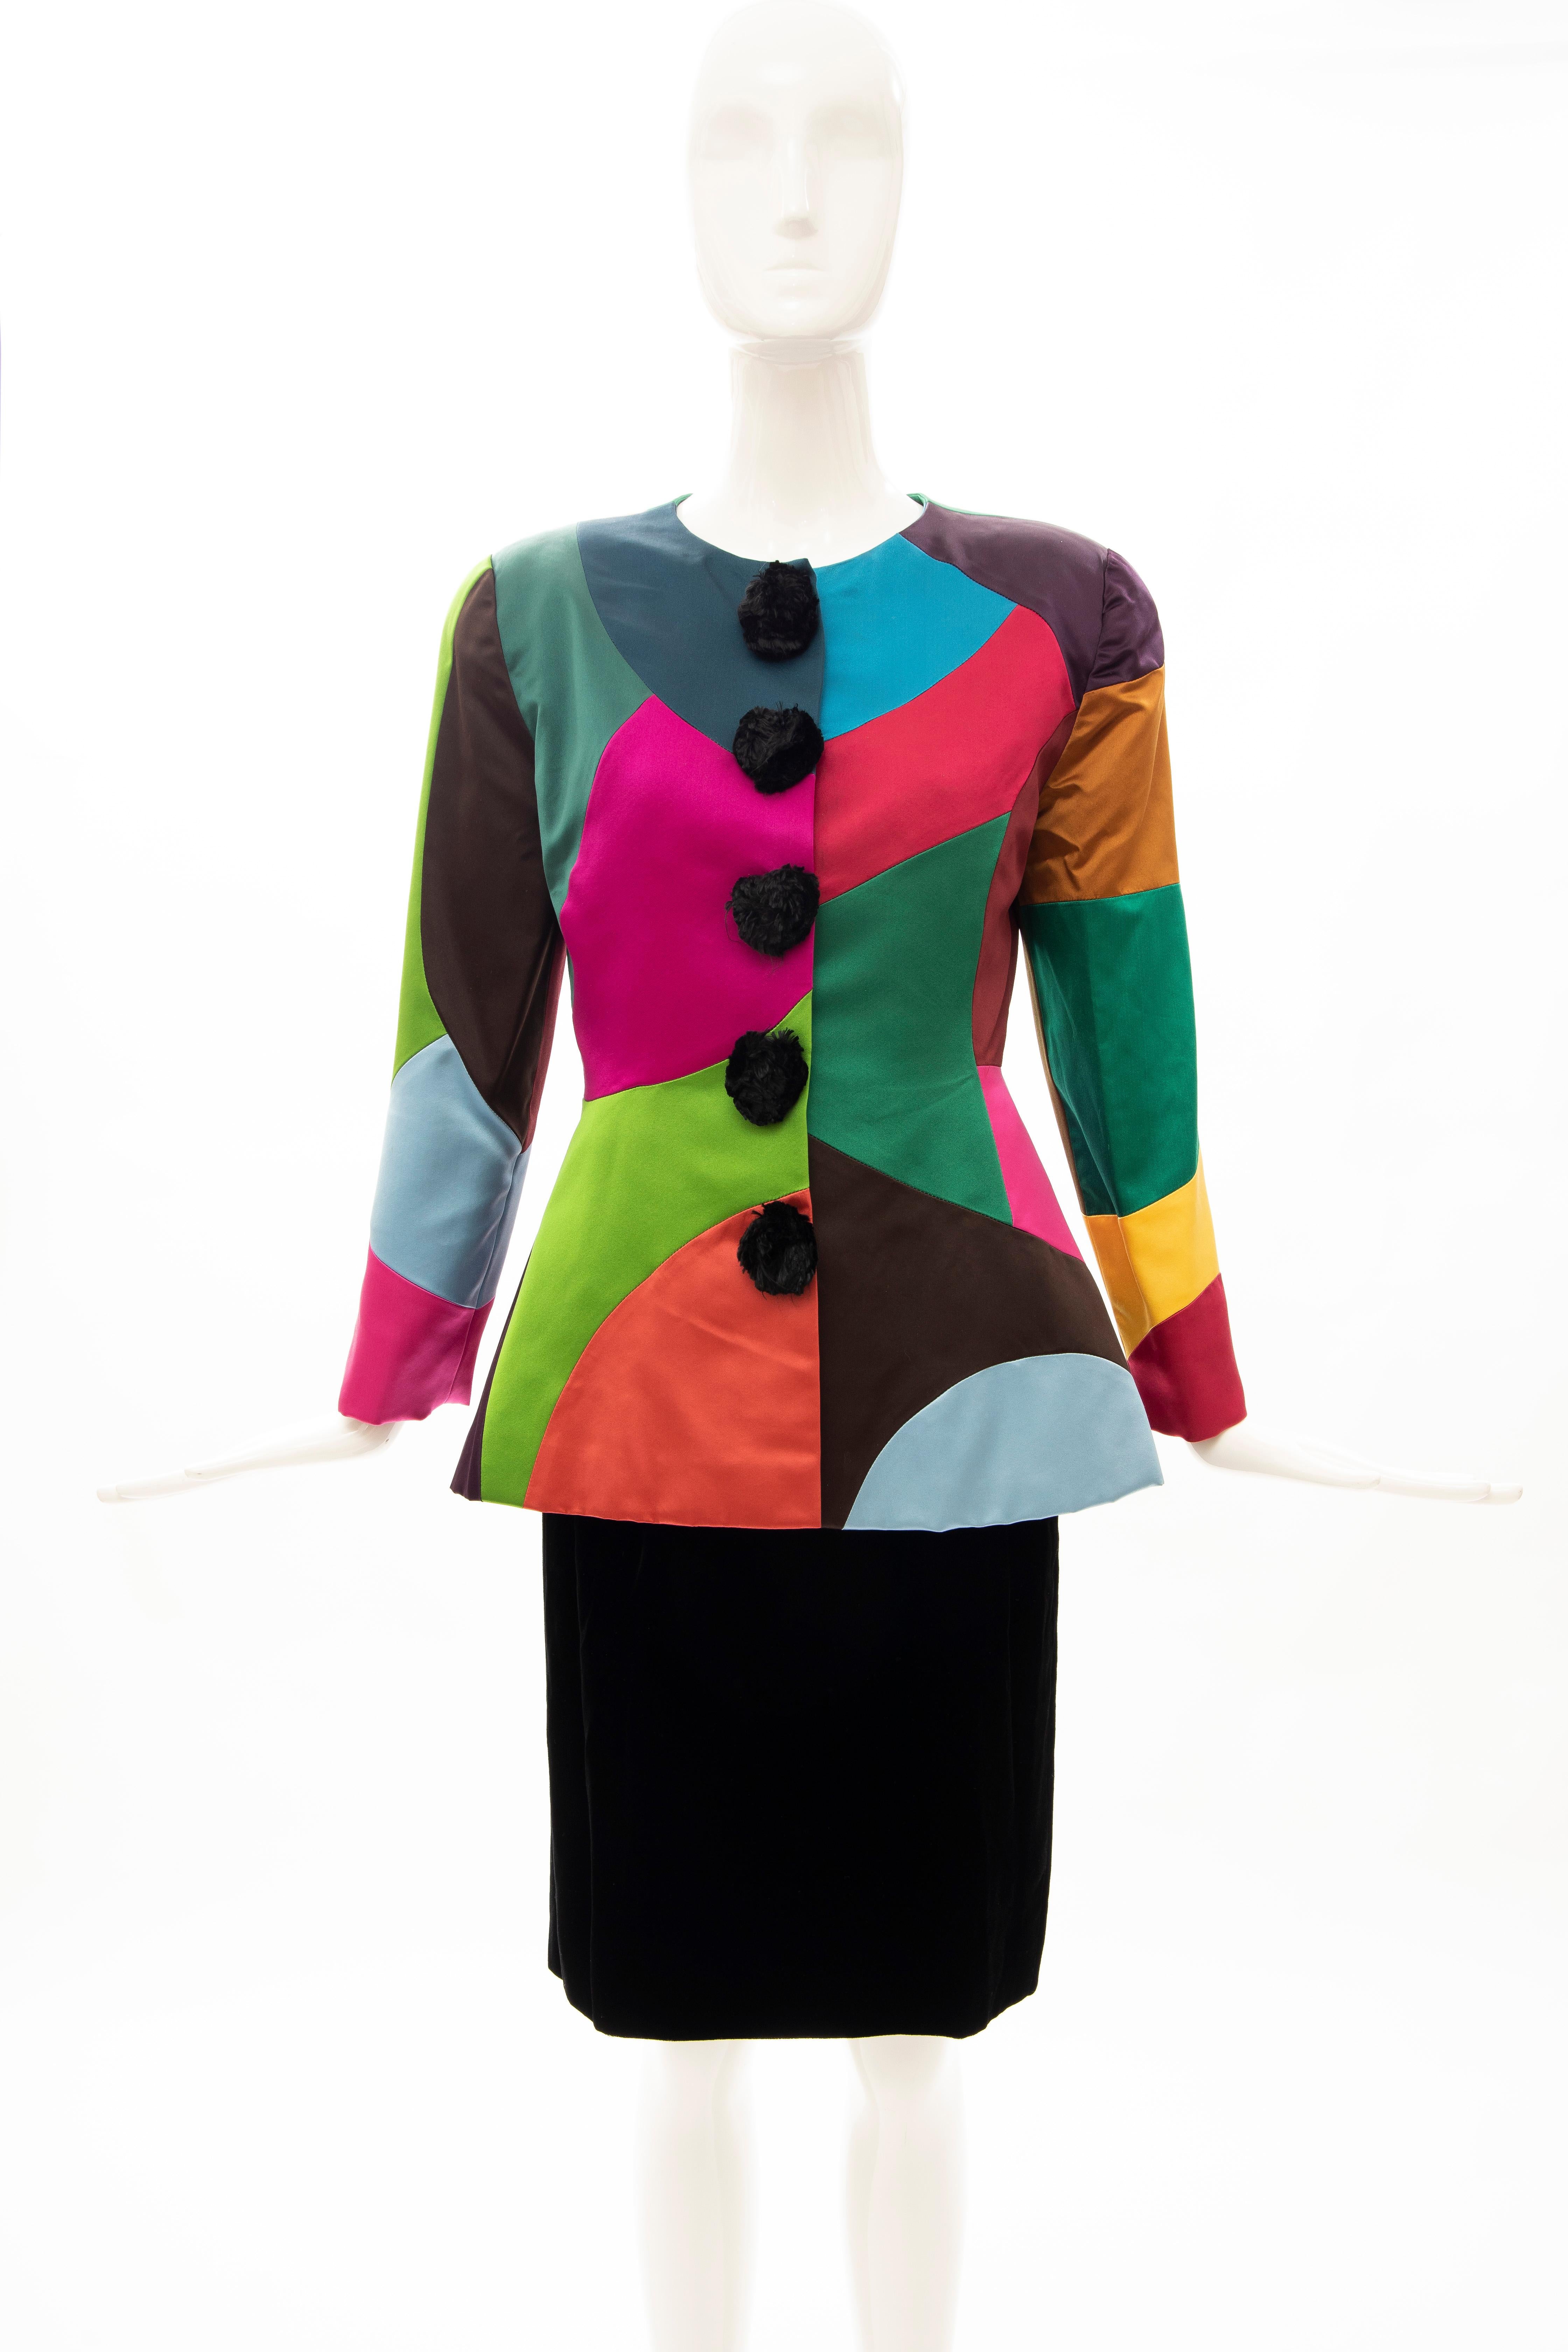 Oscar de la Renta Runway Fall 1991 silk color-block skirt suit. The jacket has snap front and hook-and-eye closure, fully lined in silk with a black silk velvet pencil skirt, concealed side zip and hook-and-eye closure and fully lined in silk.

US.